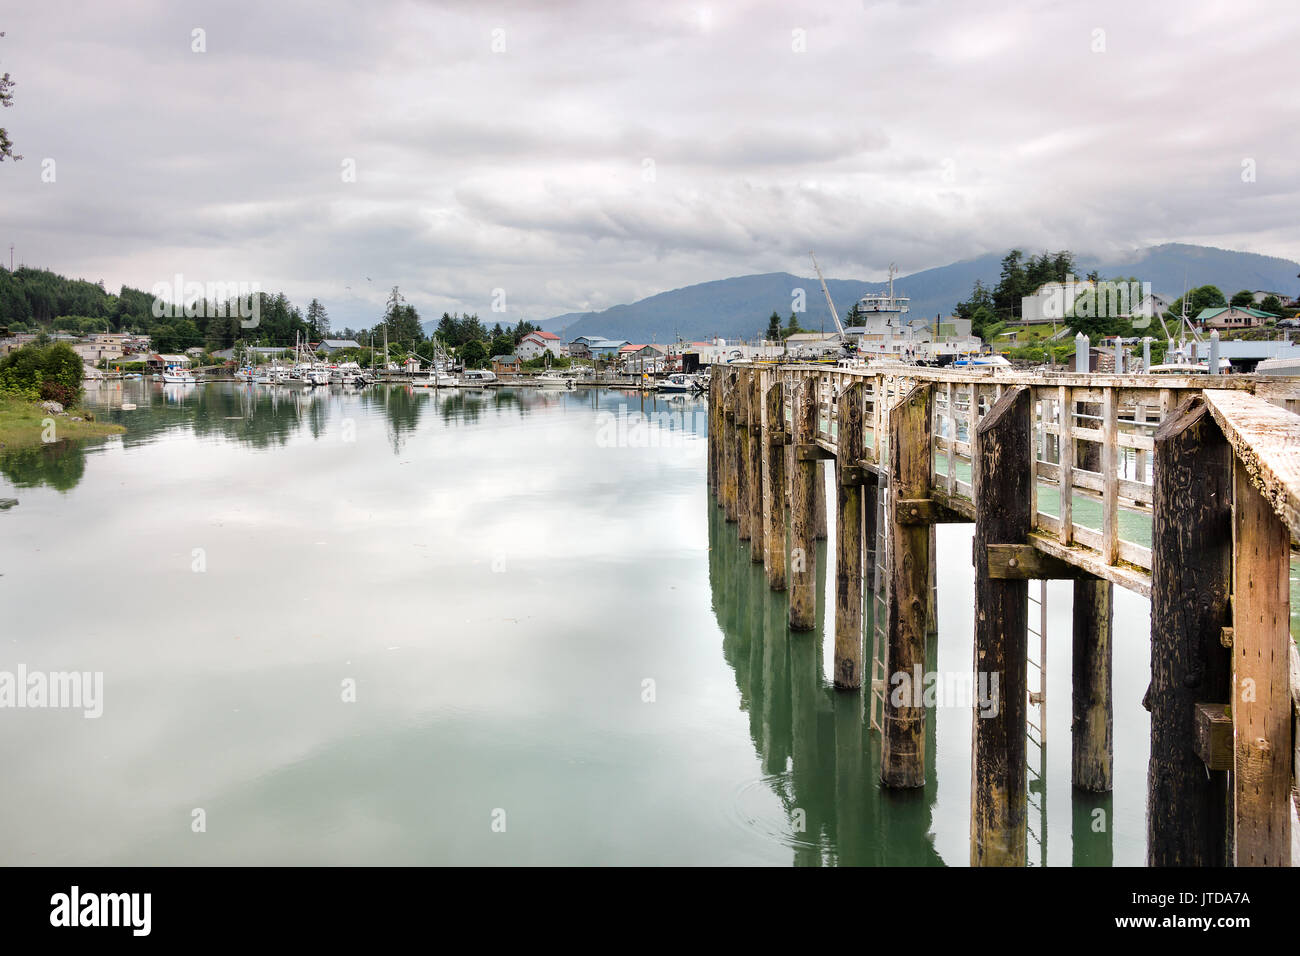 View of the TheReliance Harbour in Wrangell, Alaska. Stock Photo